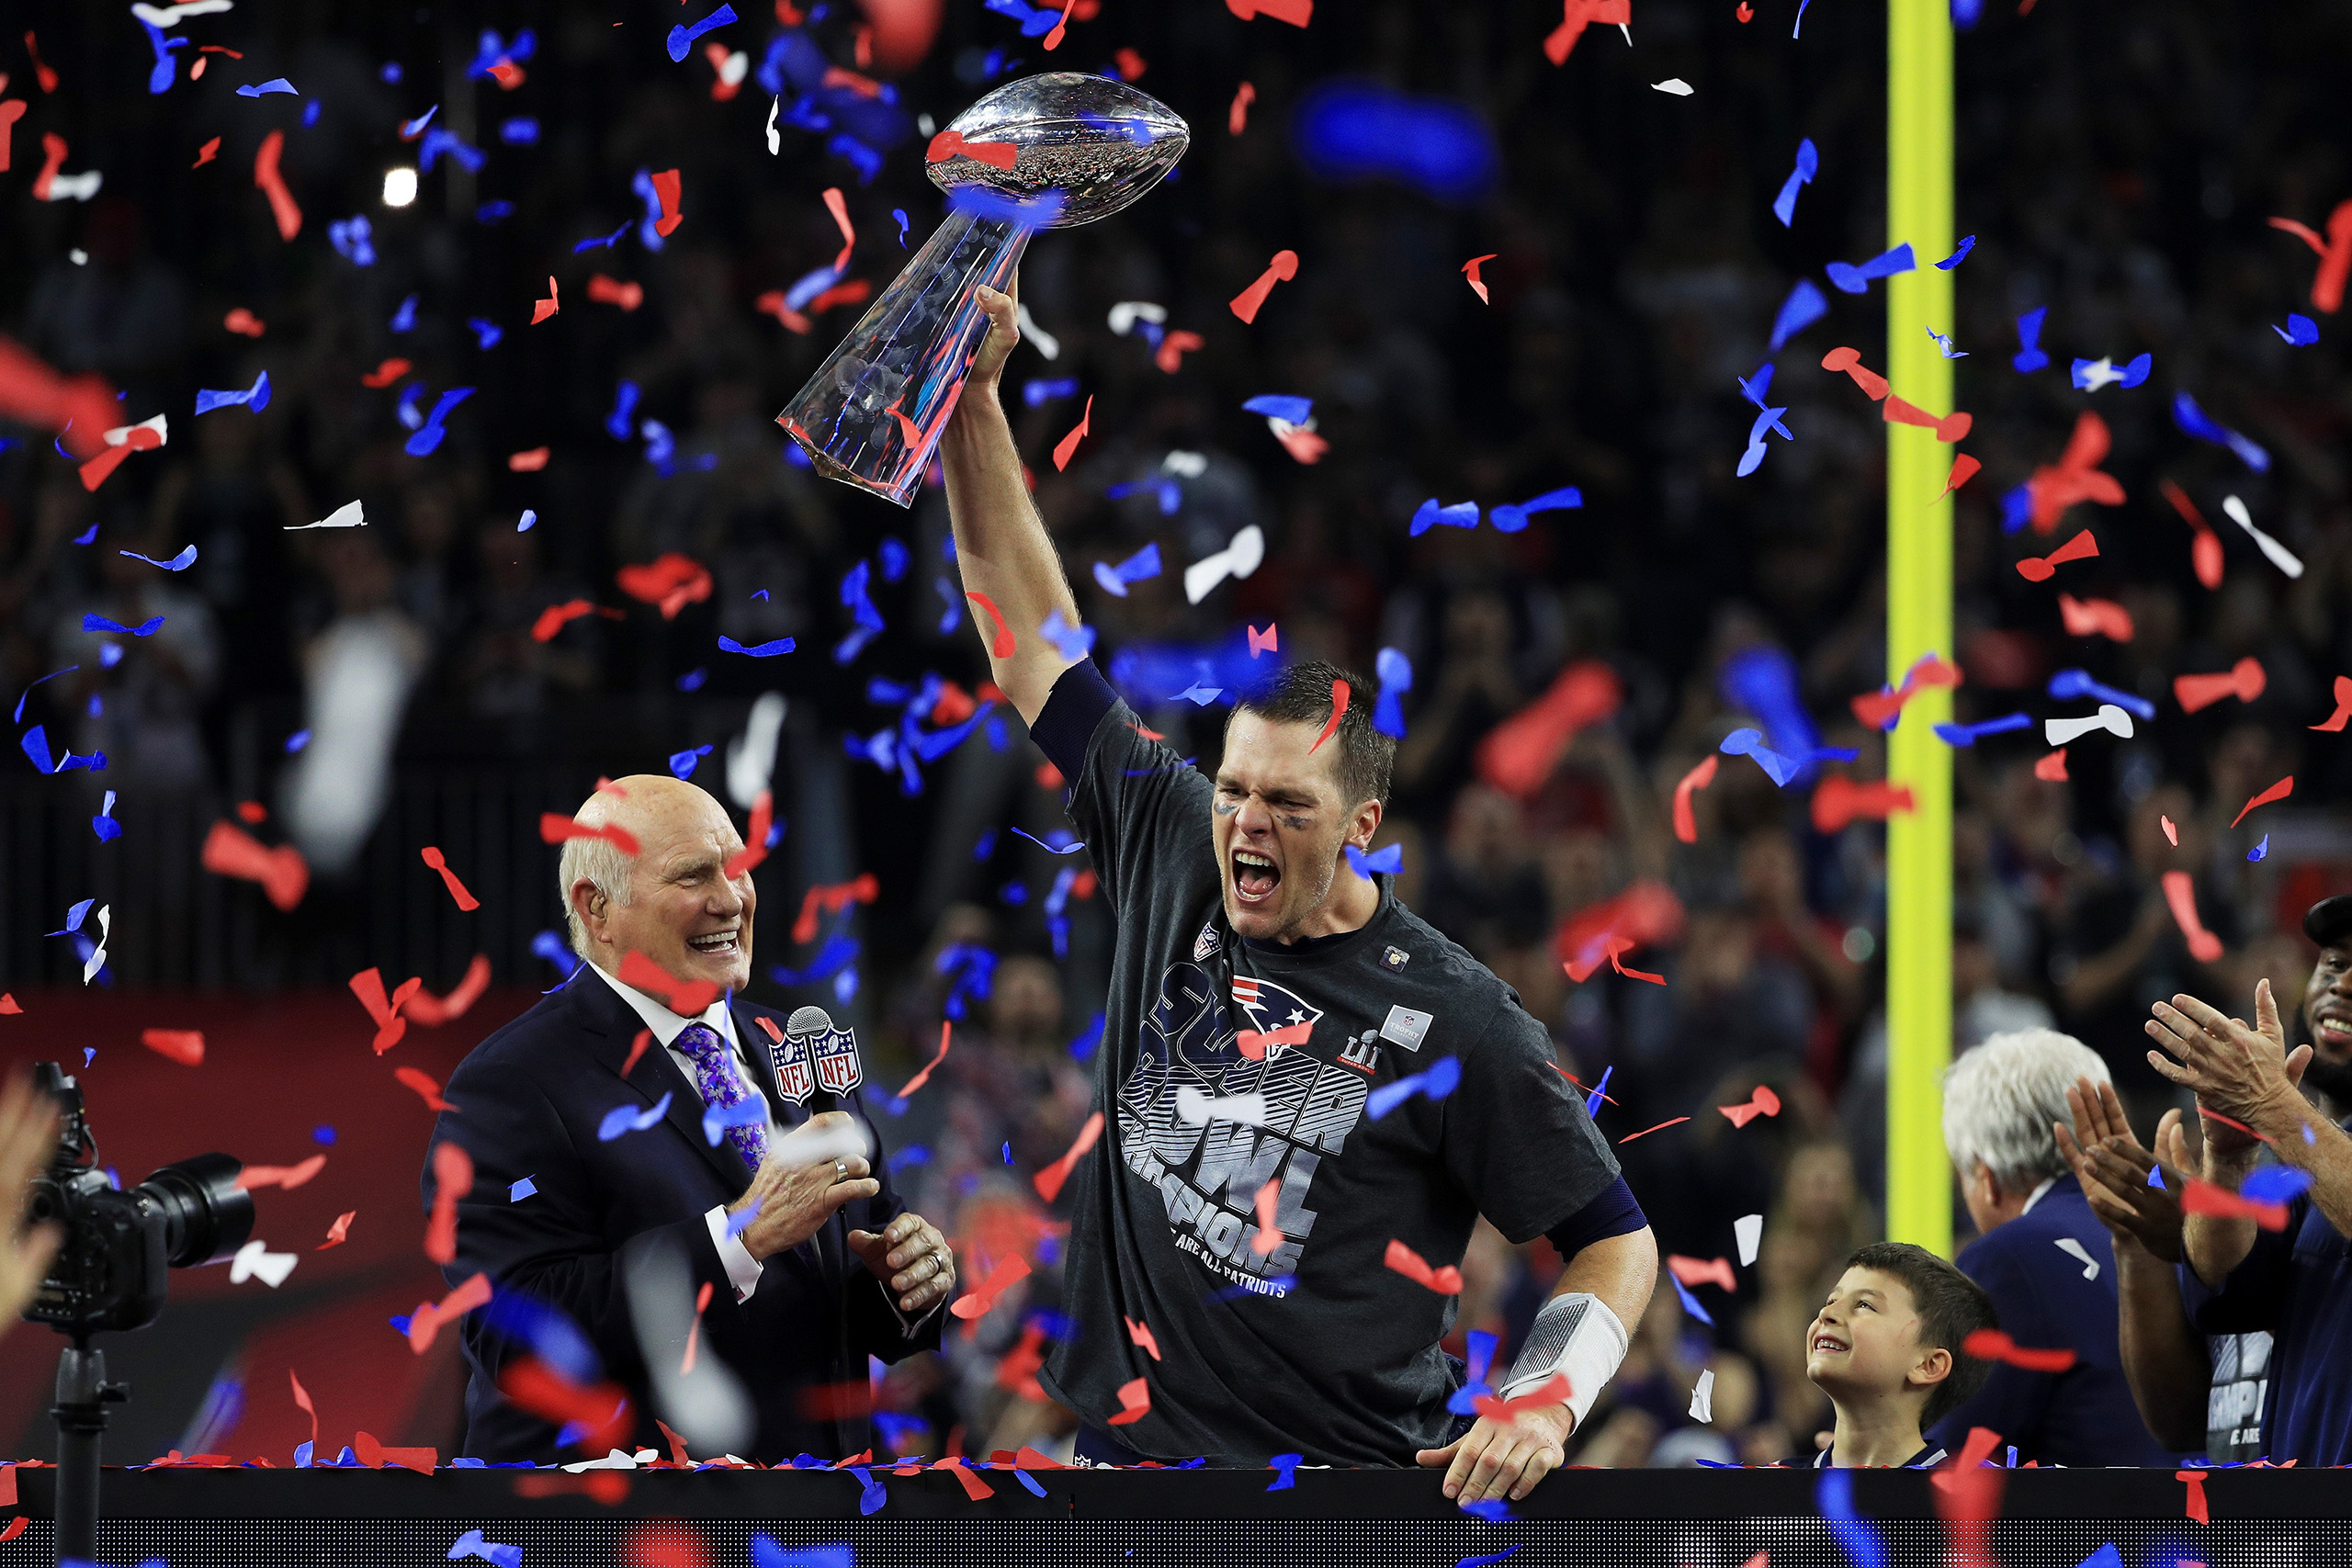 Tom Brady #12 of the New England Patriots holds the Vince Lombardi Trophy after defeating the Atlanta Falcons 34-28 during Super Bowl 51 at NRG Stadium on Feb. 5, 2017 in Houston, Texas. (Mike Ehrmann—Getty Images)